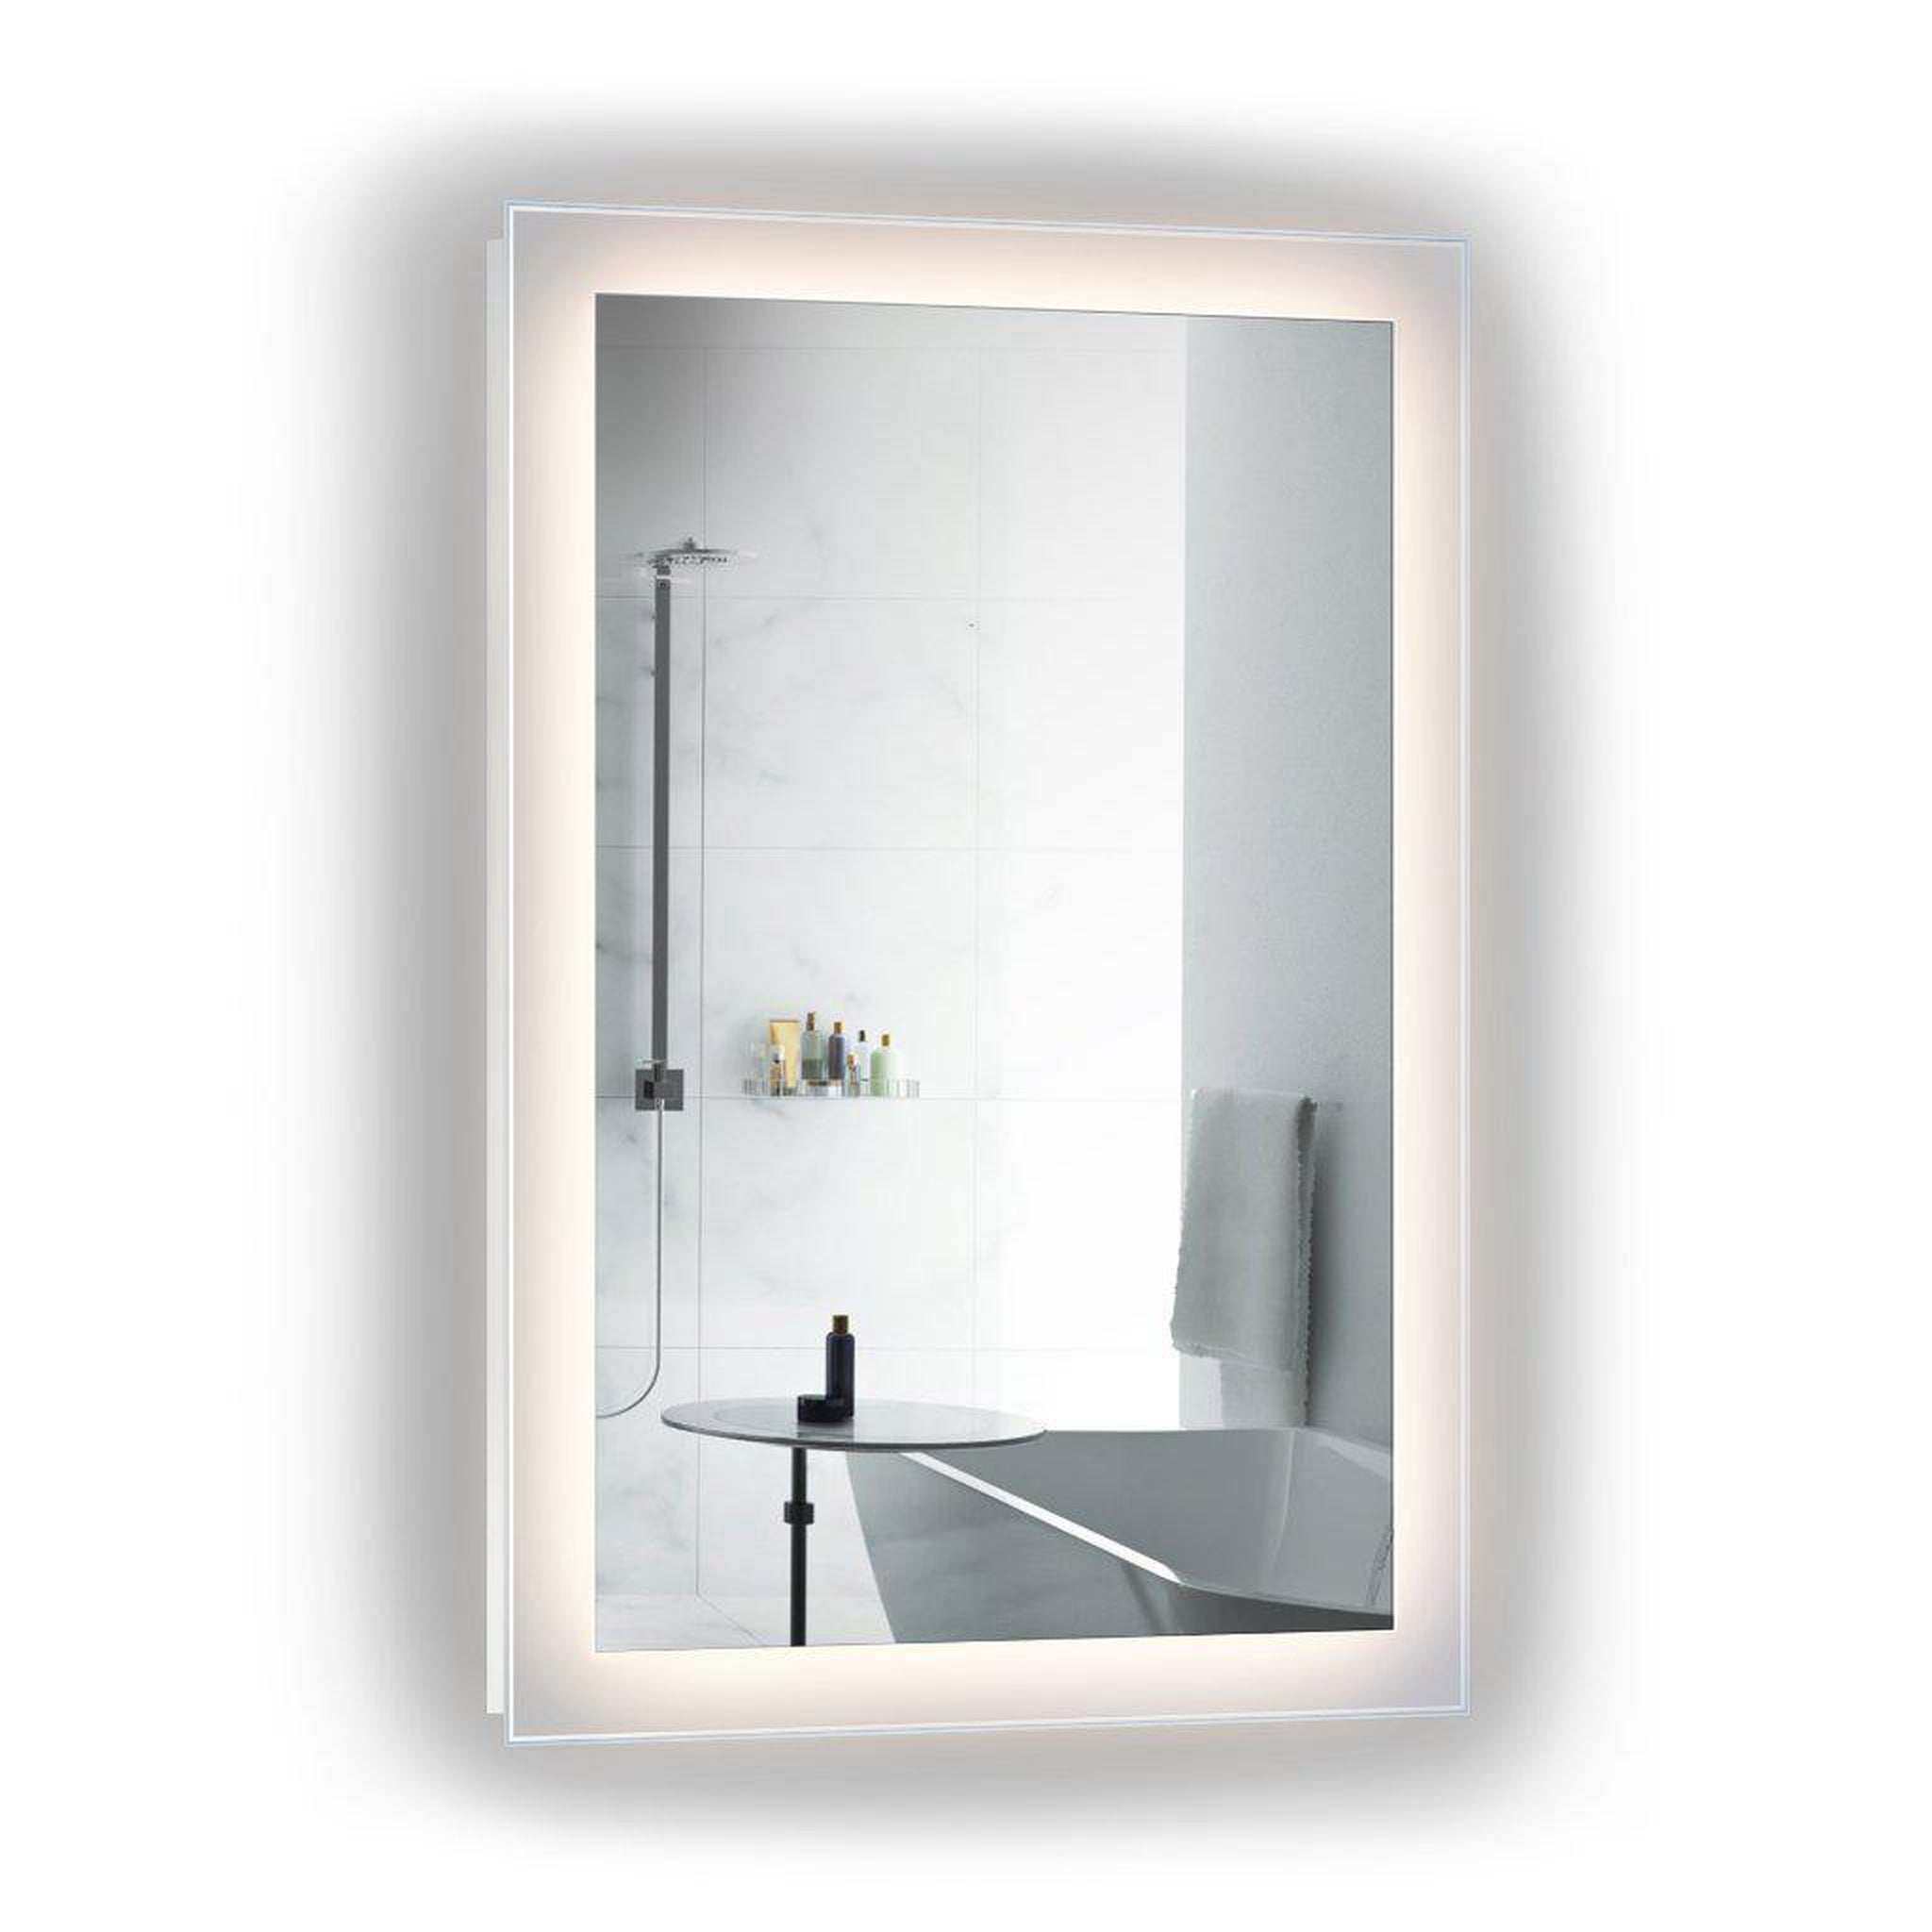 Krugg Reflections, Krugg Reflections Stella 24" x 36" 5000K Rectangular Wall-Mounted Silver-Backed LED Bathroom Vanity Mirror With Built-in Defogger and Dimmer